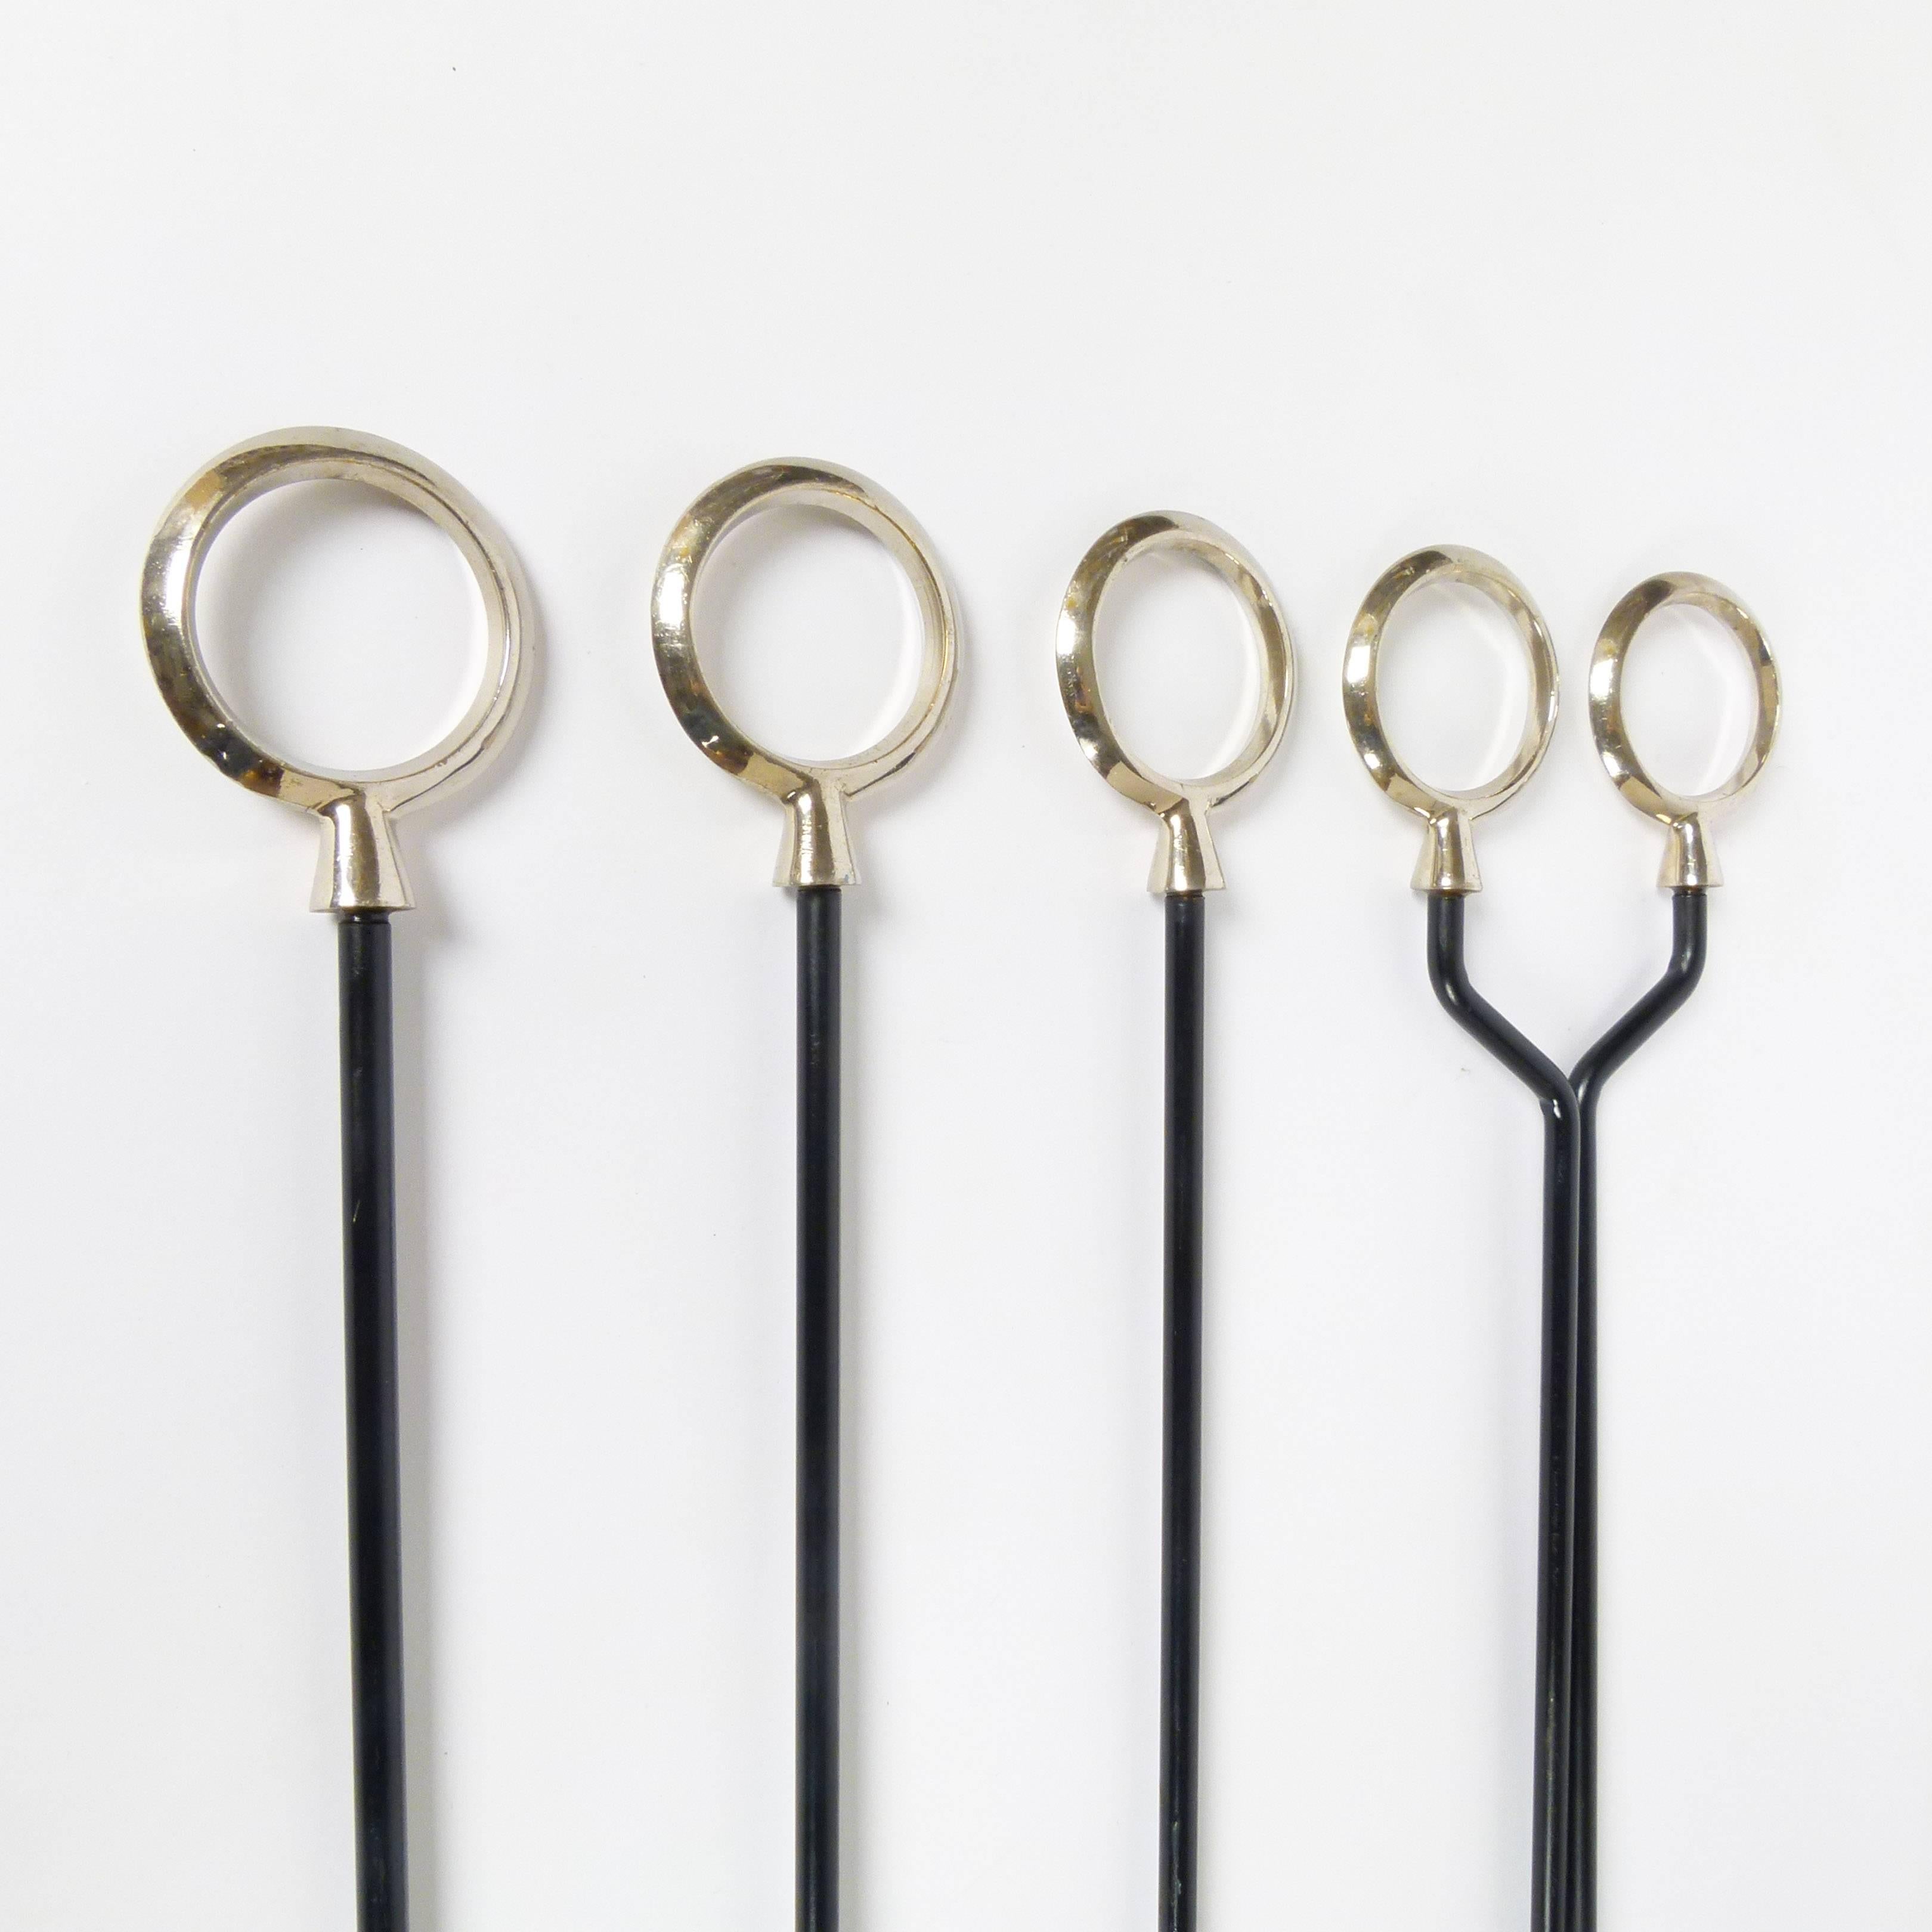 Refined Mid-Century Modern, circa 1960, fireplace tool set in wrought iron with black enamel coating, nickel plate handles, and period-correct wall-mounted hangers. Unusual extended length. Set includes four tools and two iron wall-mount hangers.